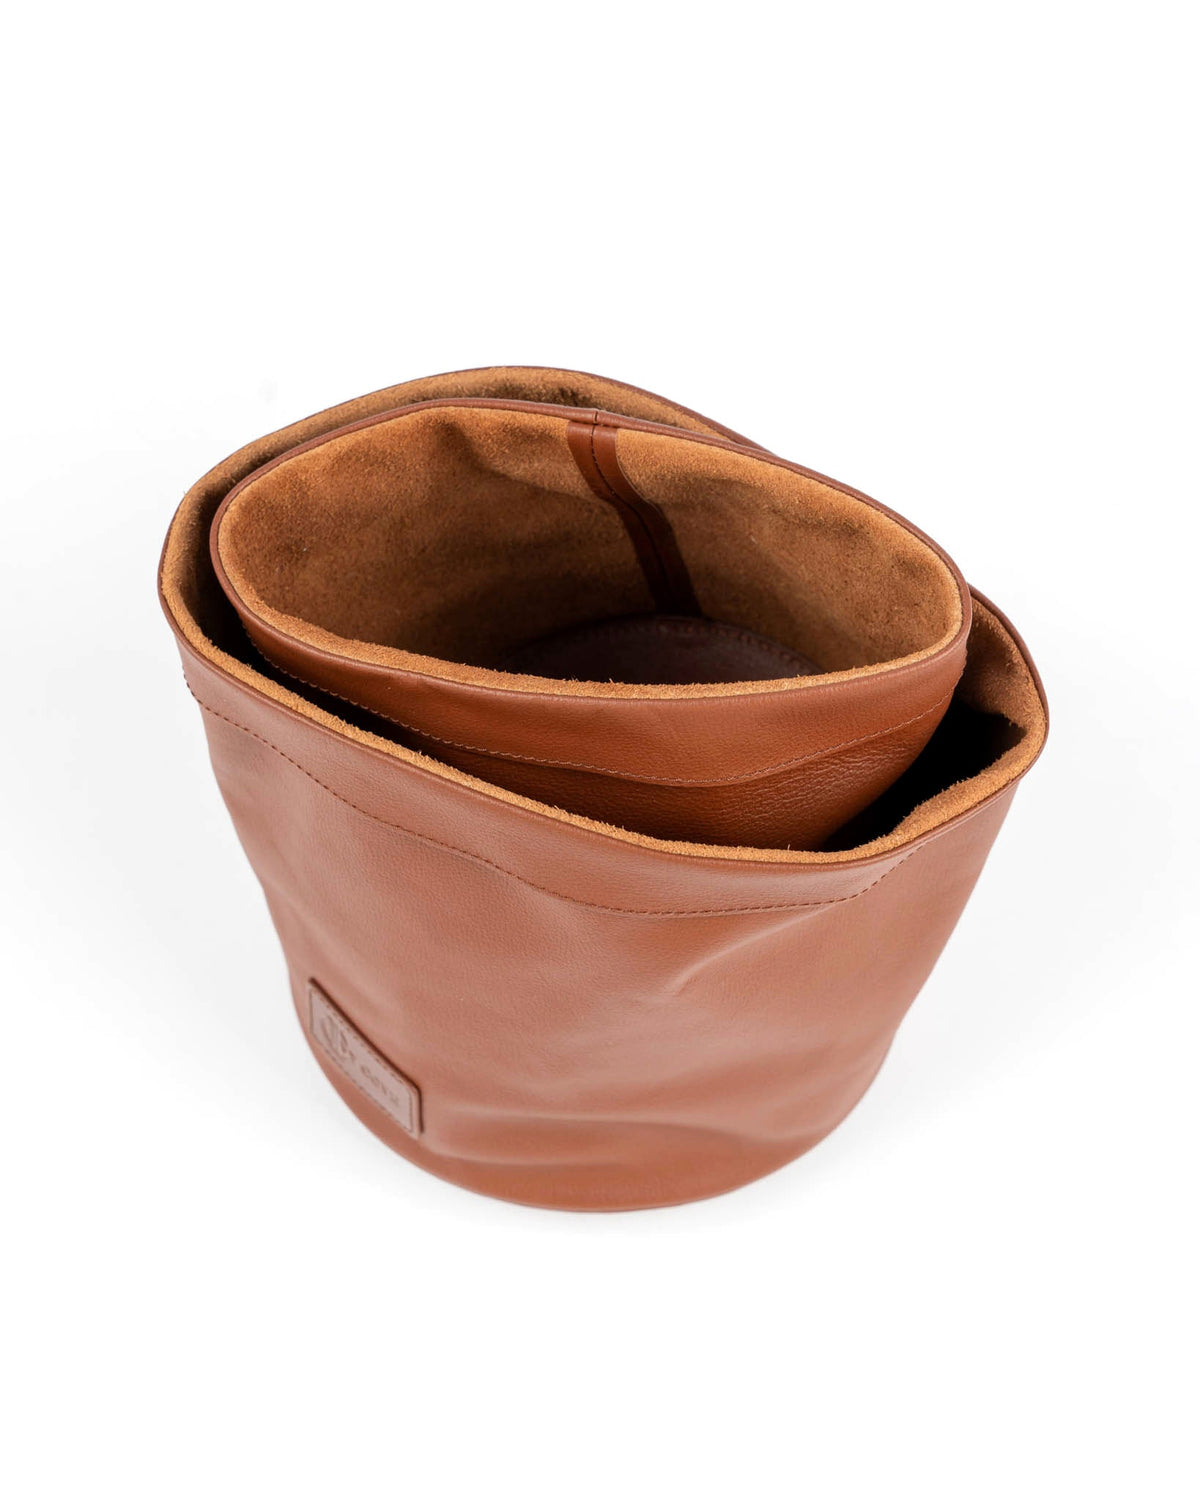 Driftwood Leather Planter - Ivy Cove Montecito